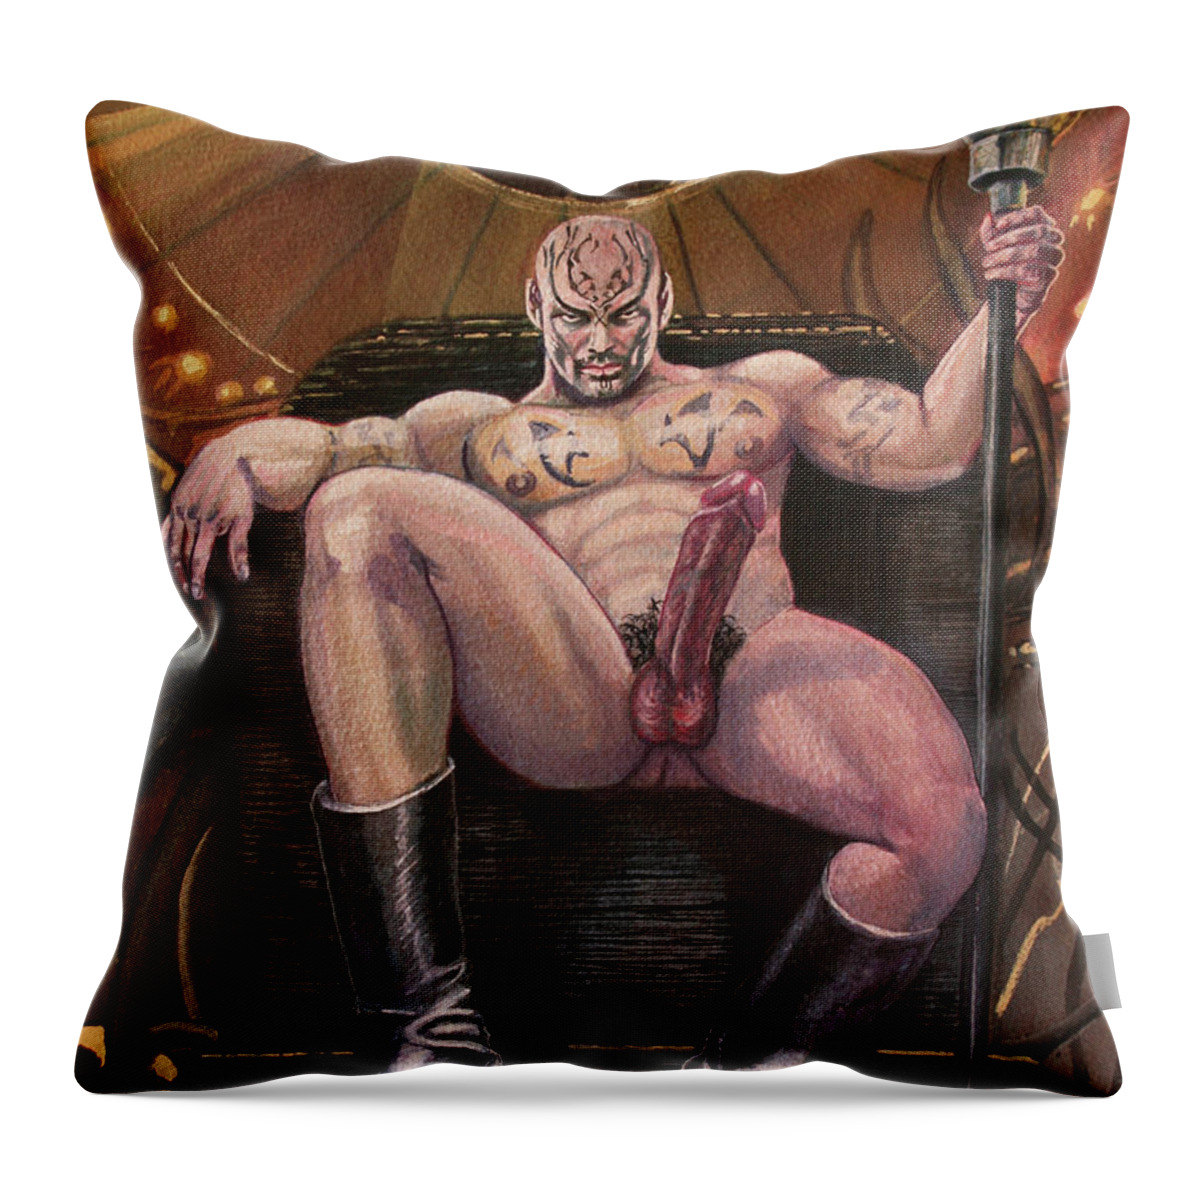 Male Nude Throw Pillow featuring the painting Brooding Tyrant by Marc DeBauch